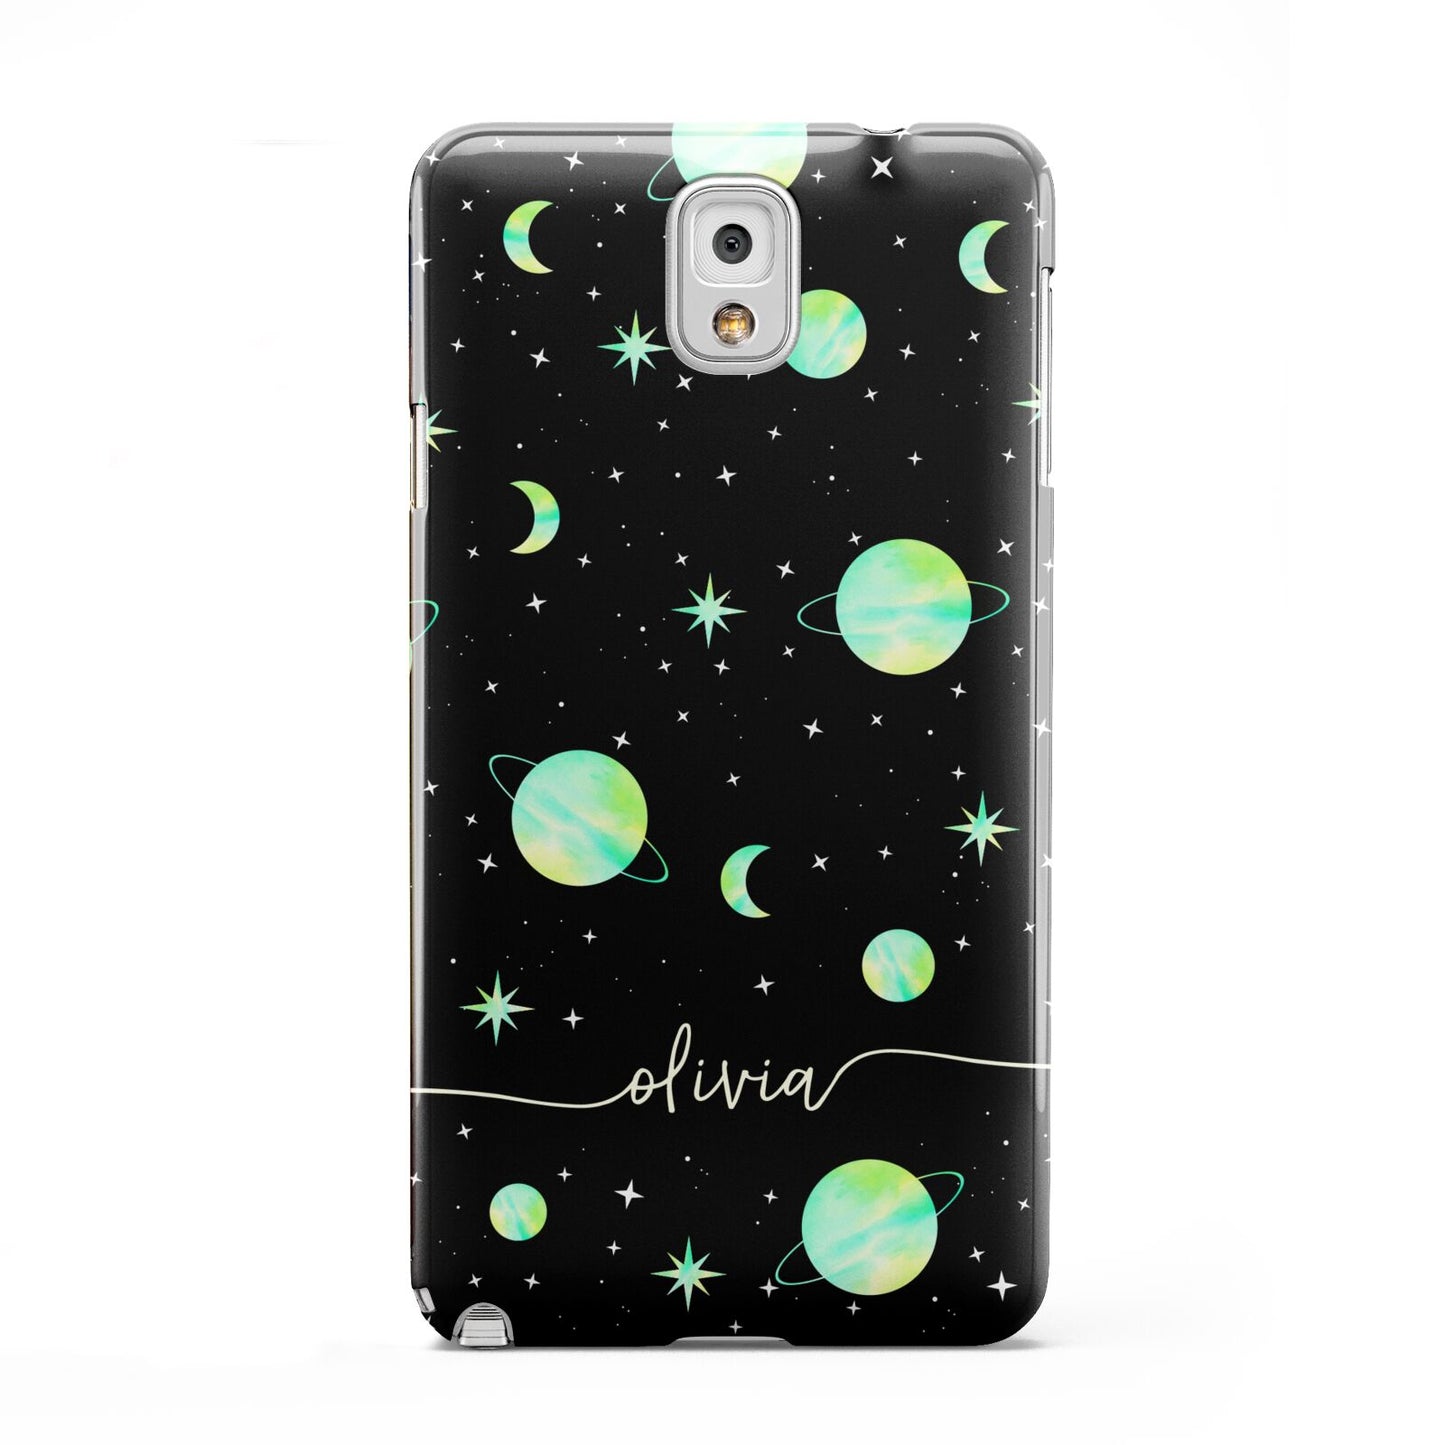 Green Galaxy Personalised Name Samsung Galaxy Note 3 Case